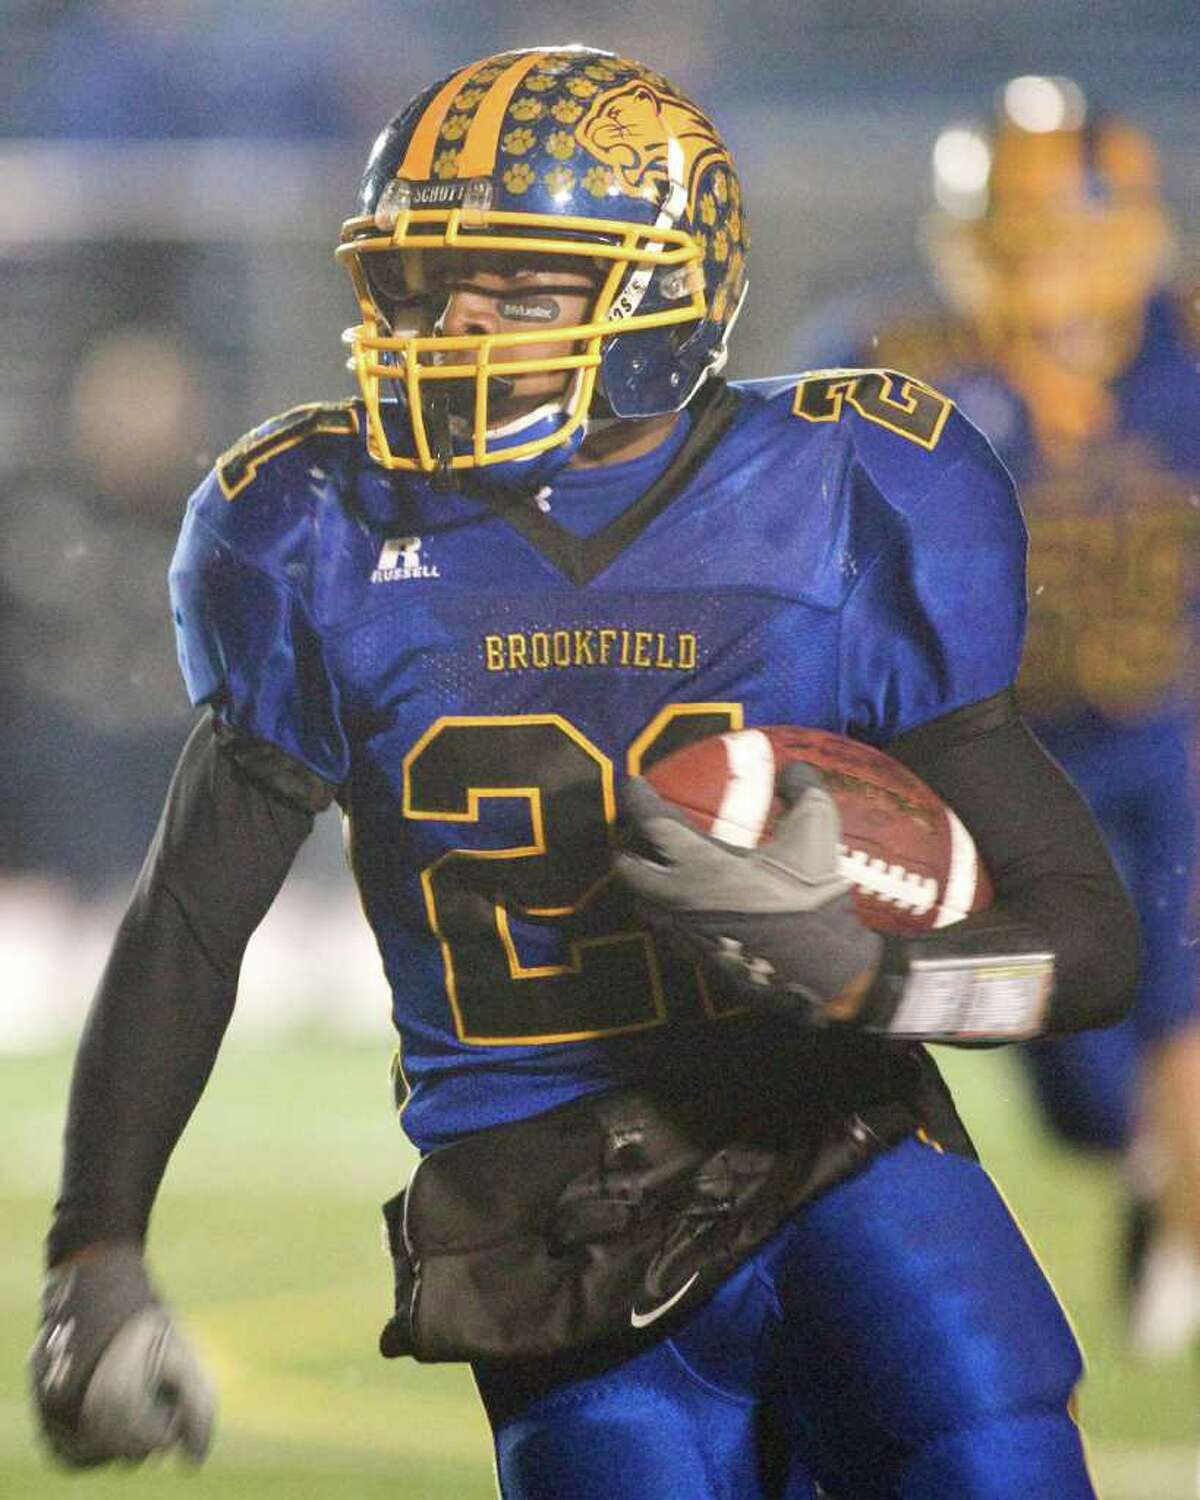 Brookfield's Leaon Gordon picks up a first down after catching a pass in the Bobcats' Class M state tournament quarterfinal game against Lyman Hall Tuesday night, Nov. 30, 2010, at Brookfield High School.